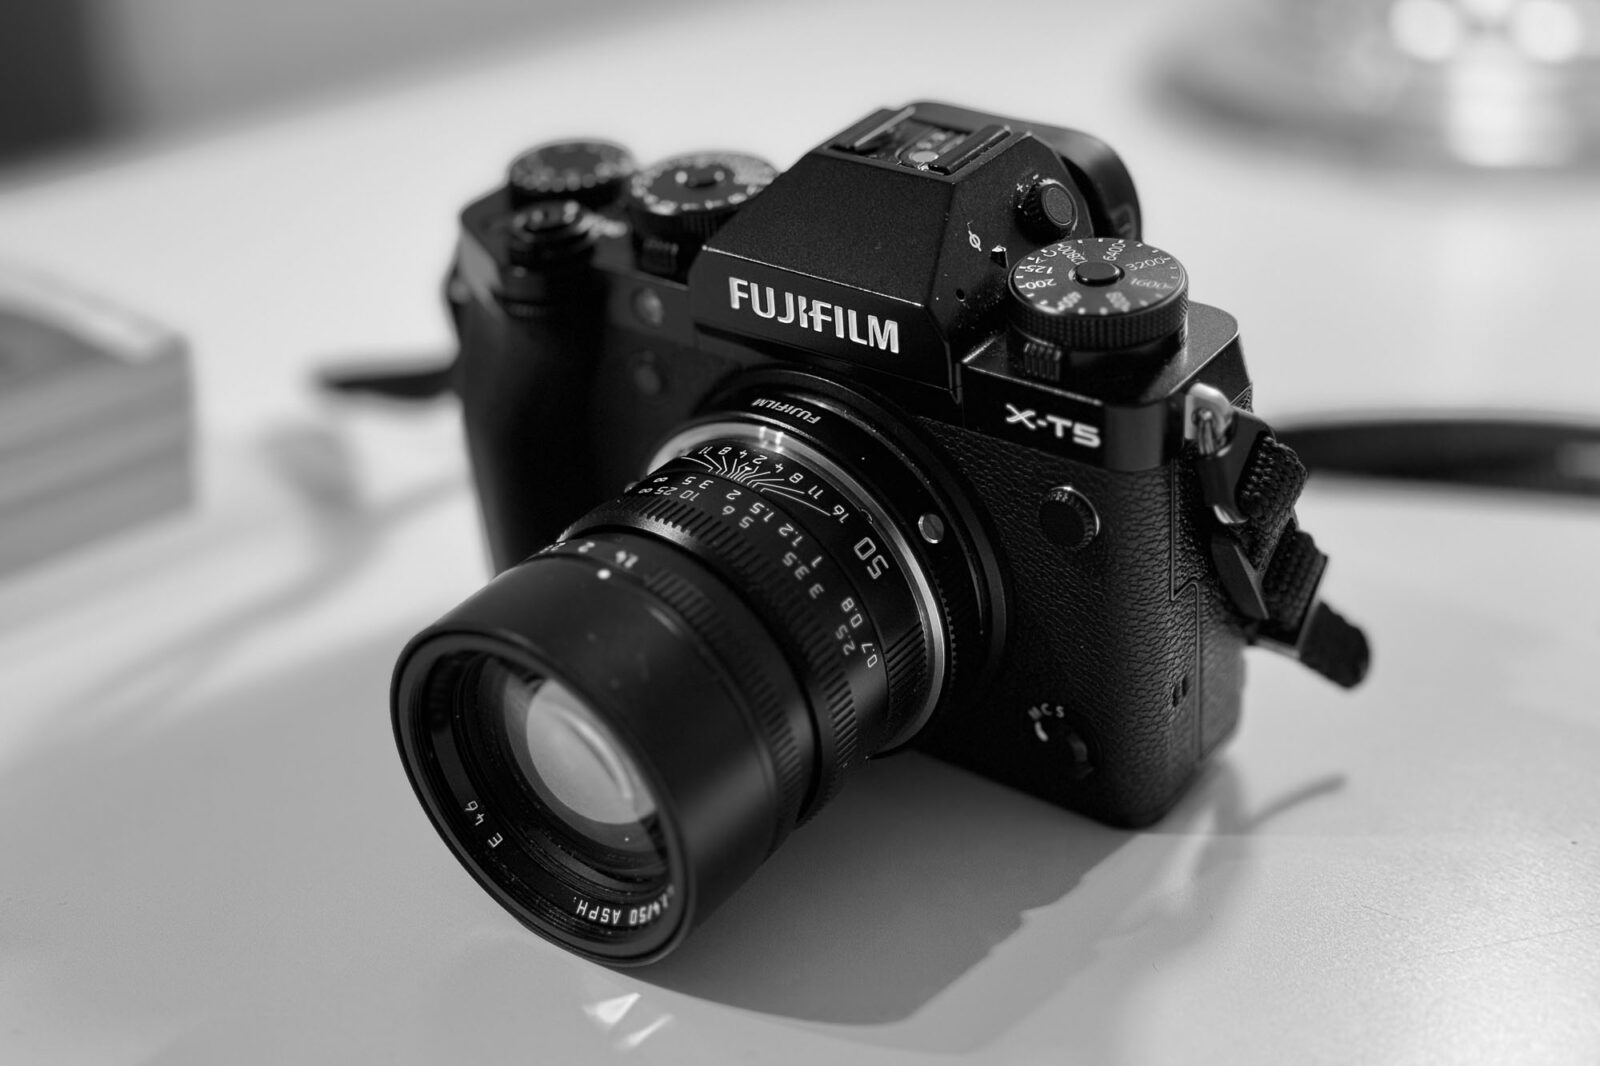 A 50 mm Leica lens is attached via an adapter to a Fujifilm X-T5 camera body